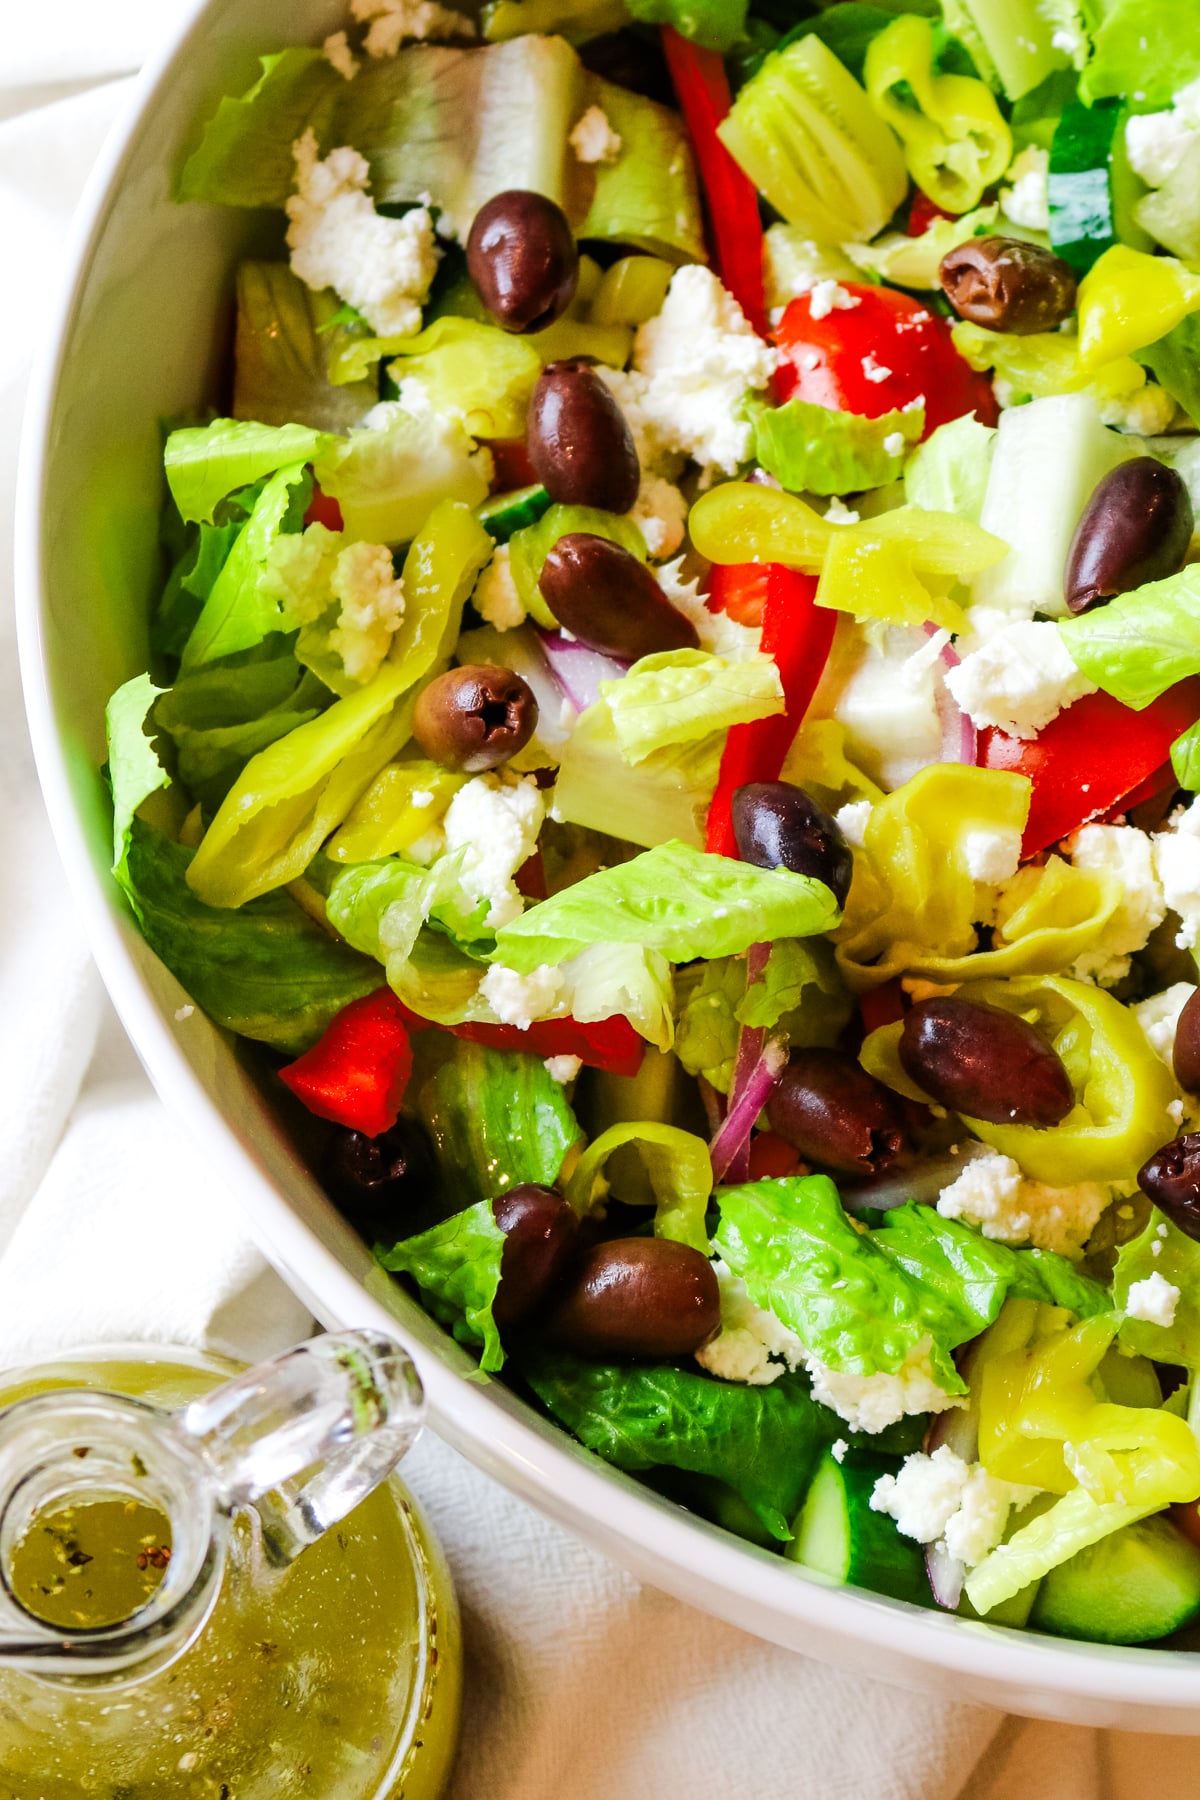 chopped salad in a large white bowl with dressing on the bottom left.